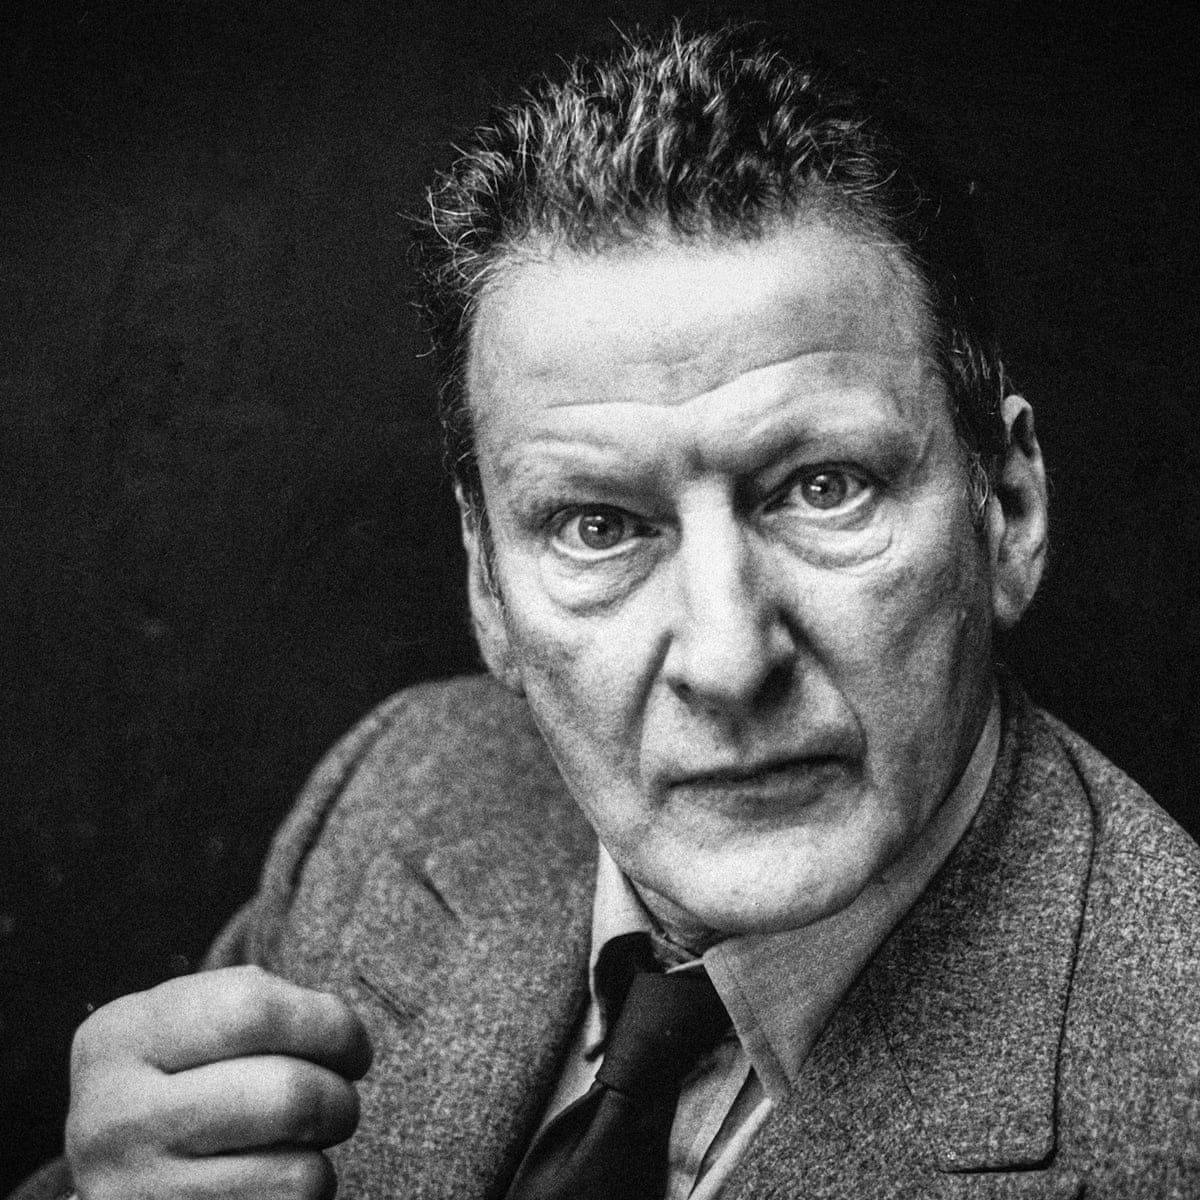 Lucian Freud photographed by Jane Bown for the Observer